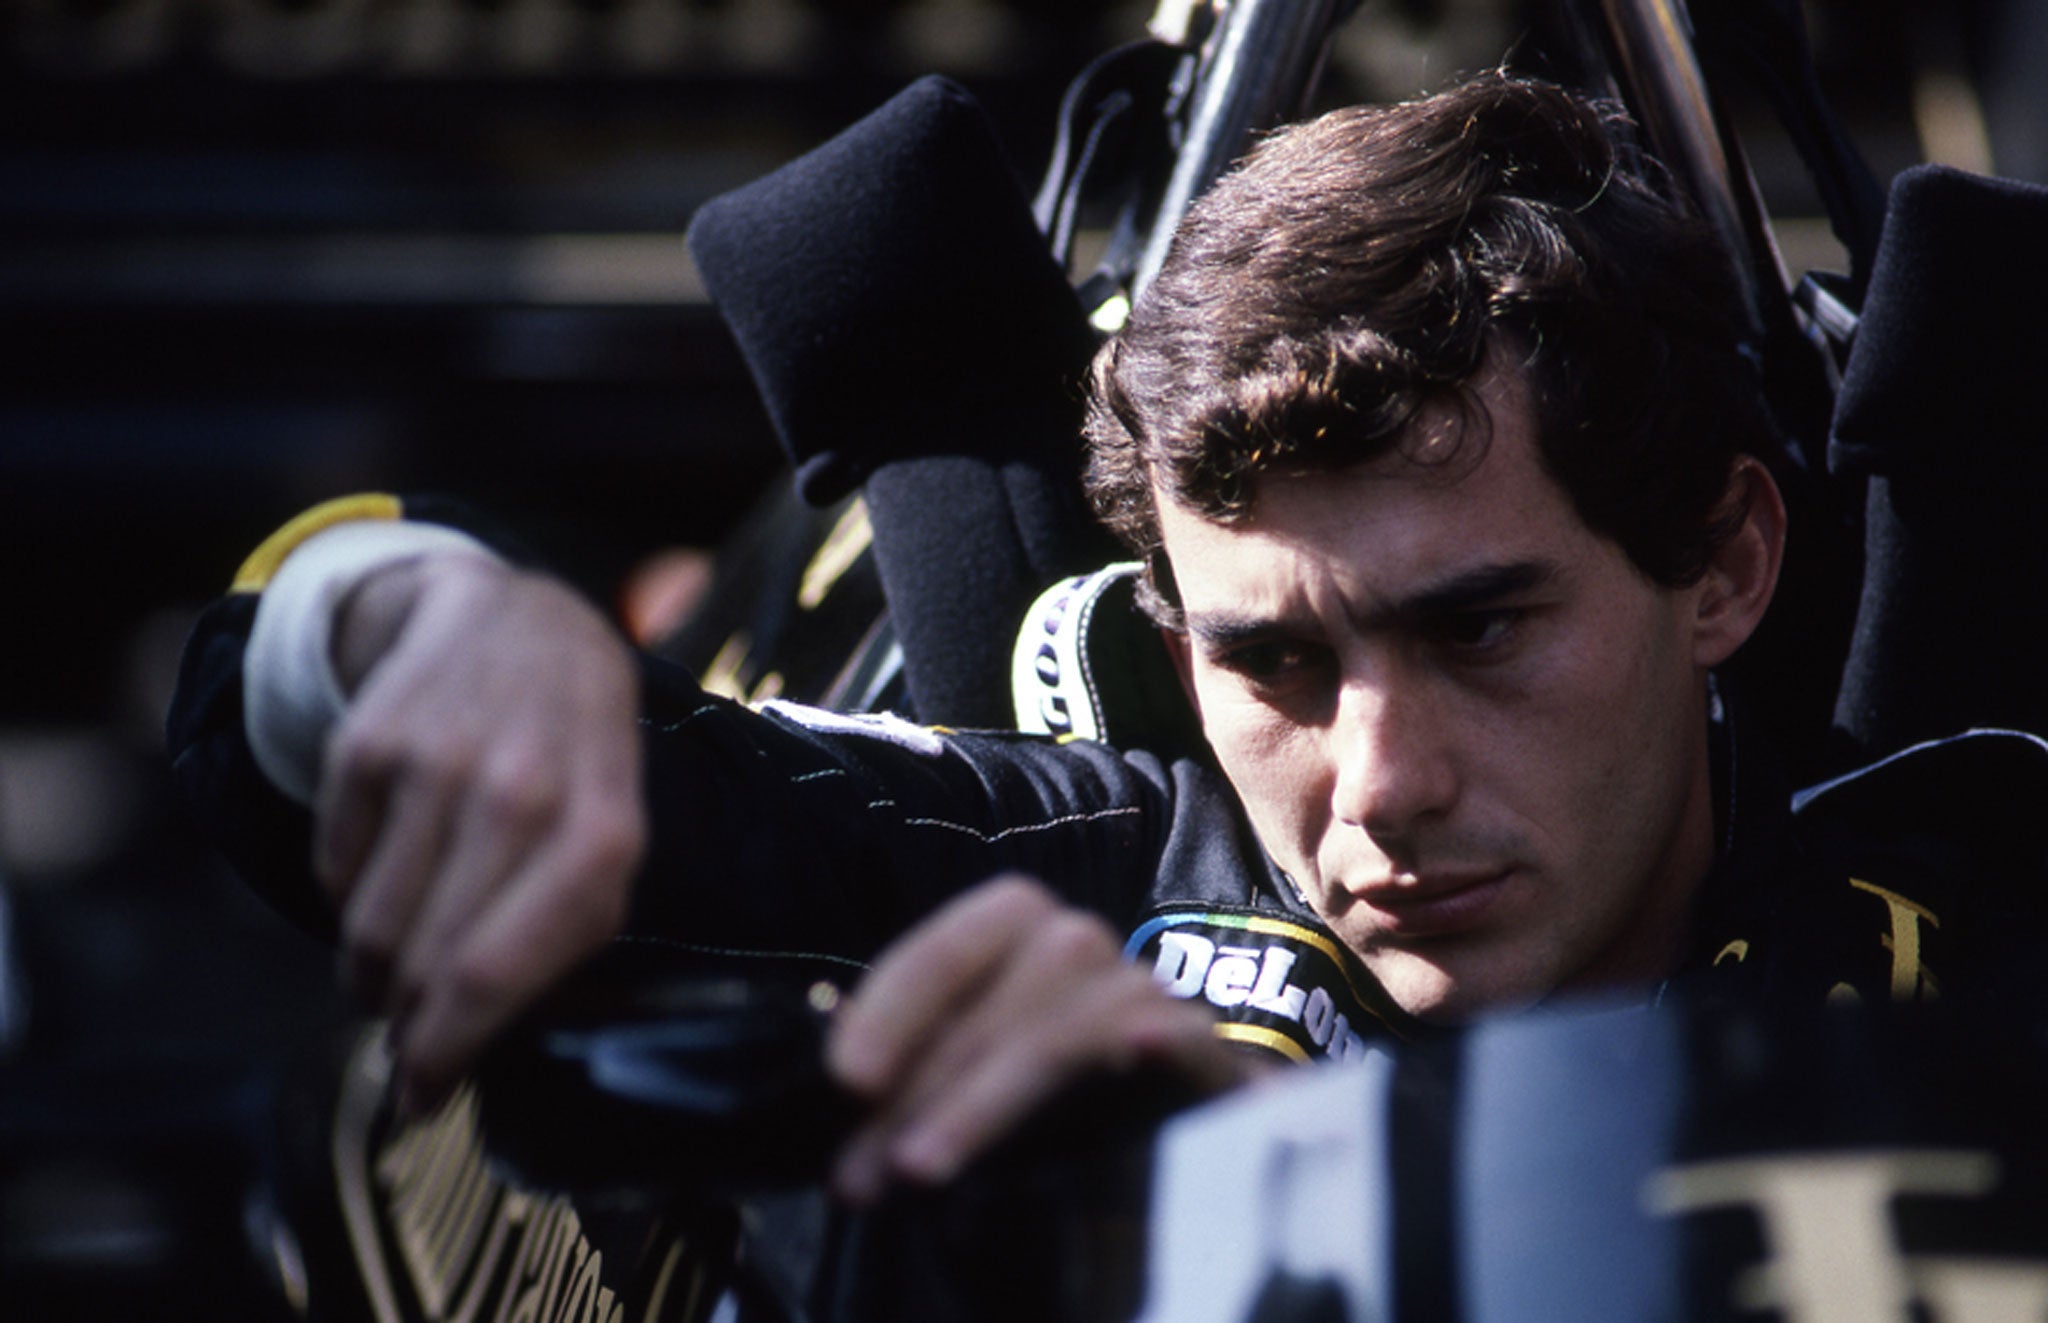 Ayrton Senna died in a car crash in 1994 at the San Marino Grand Prix in Italy (Sutton Images)